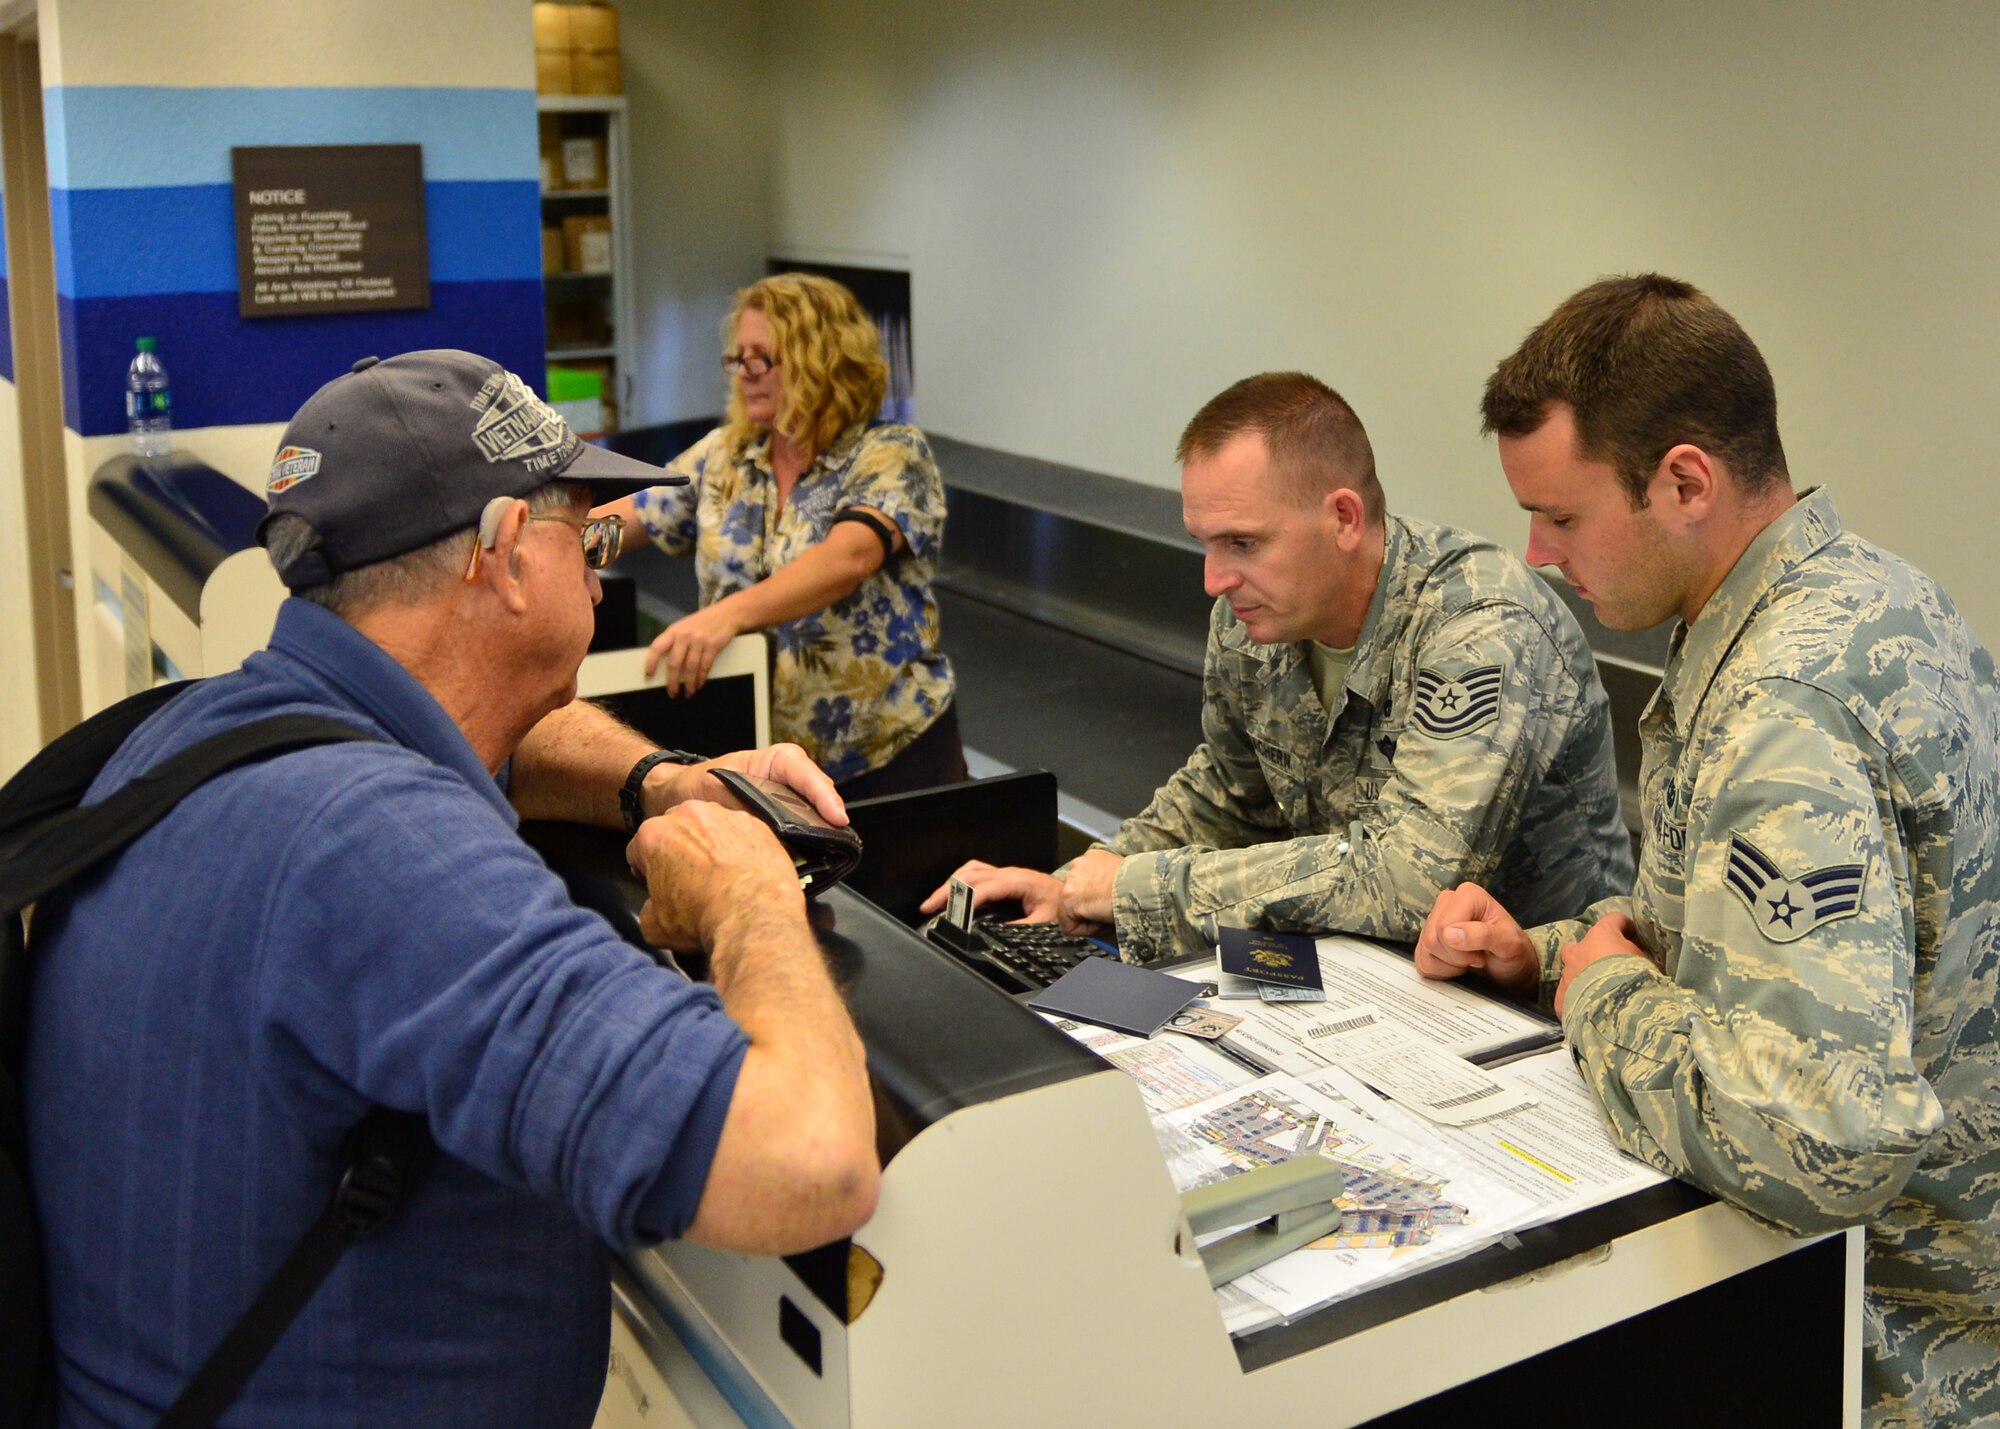 Tech. Sgt. Tom McEachern and Senior Airman Brice Safreed, both Air Force Reservists from the 32nd Aerial Port Squadron, Pittsburgh Air Reserve Station, issue a boarding pass to a passenger on Joint Base Pearl Harbor-Hickam, April 14, 2016. Approximately 30 Airmen from the 32nd APS traveled to JBPHH to conduct annual training hosted by the Airmen of the 735th Air Mobility Squadron. (U.S. Air Force photo by Tech. Sgt. Aaron Oelrich/Released)